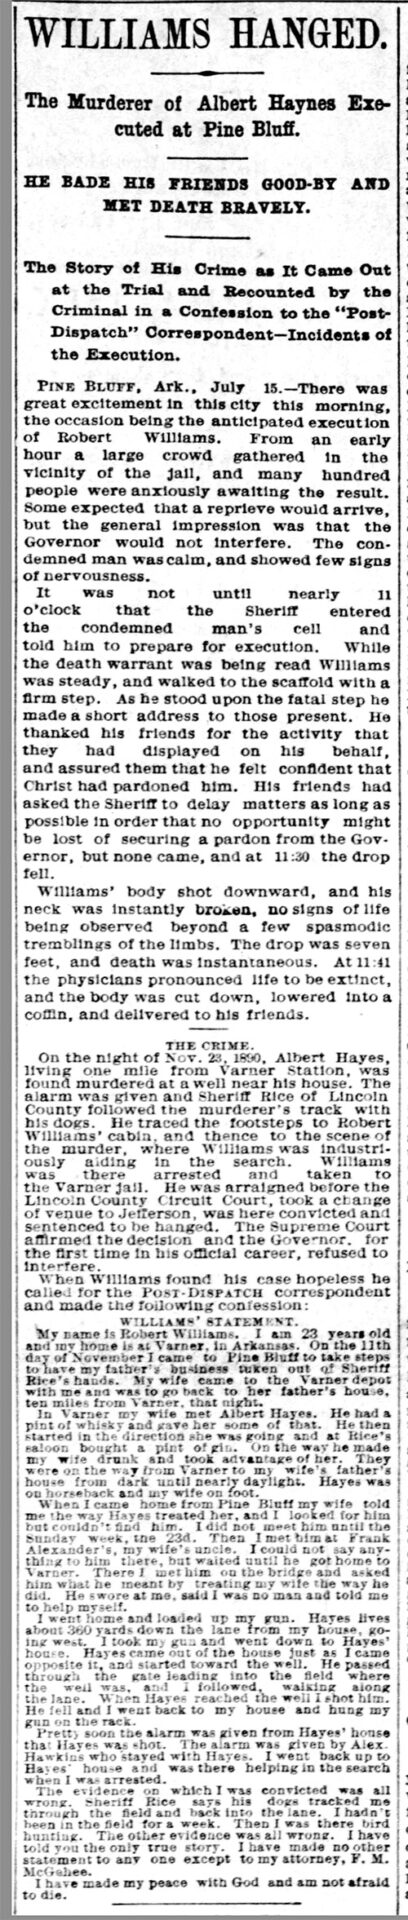 "Williams Hanged" newspaper clipping